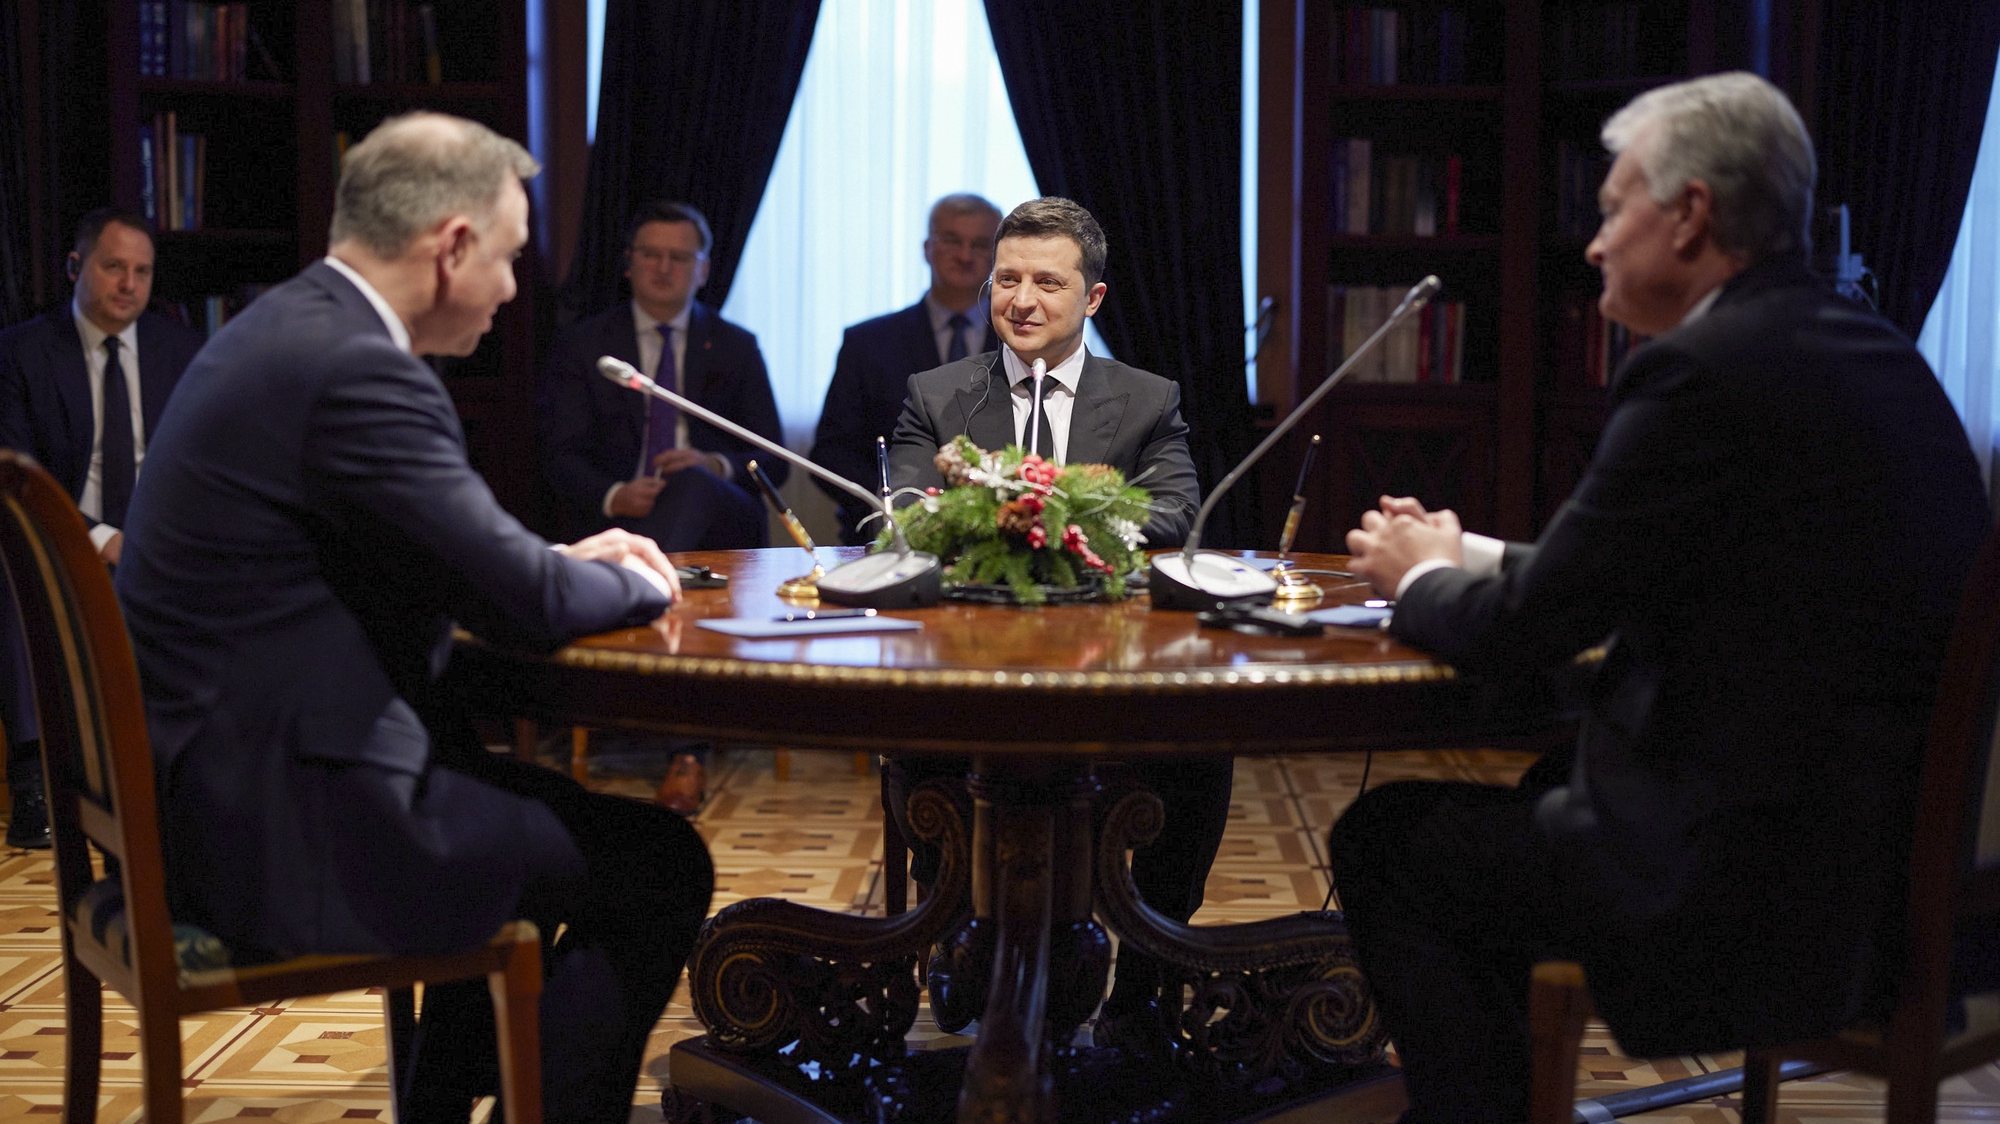 epa09651498 A handout photo made available by the Ukrainian presidential press service shows Ukrainian President Volodymyr Zelensky (C), Lithuanian President Gitanas Nauseda (R) and Polish President Andrzej Duda (L) during their trilateral meeting in the State residence Synyogora, not far from the Western-Ukrainian city of Ivano-Frankivsk, Ukraine, 20 December 2021. The Ukrainian, Polish and Lithuanian presidents arrived to the Synyogora State residence for a tripartite meeting, and after that they they are expected to sign a joint statement.  EPA/UKRAINIAN PRESIDENTIAL PRESS SERVICE HANDOUT HANDOUT  HANDOUT EDITORIAL USE ONLY/NO SALES